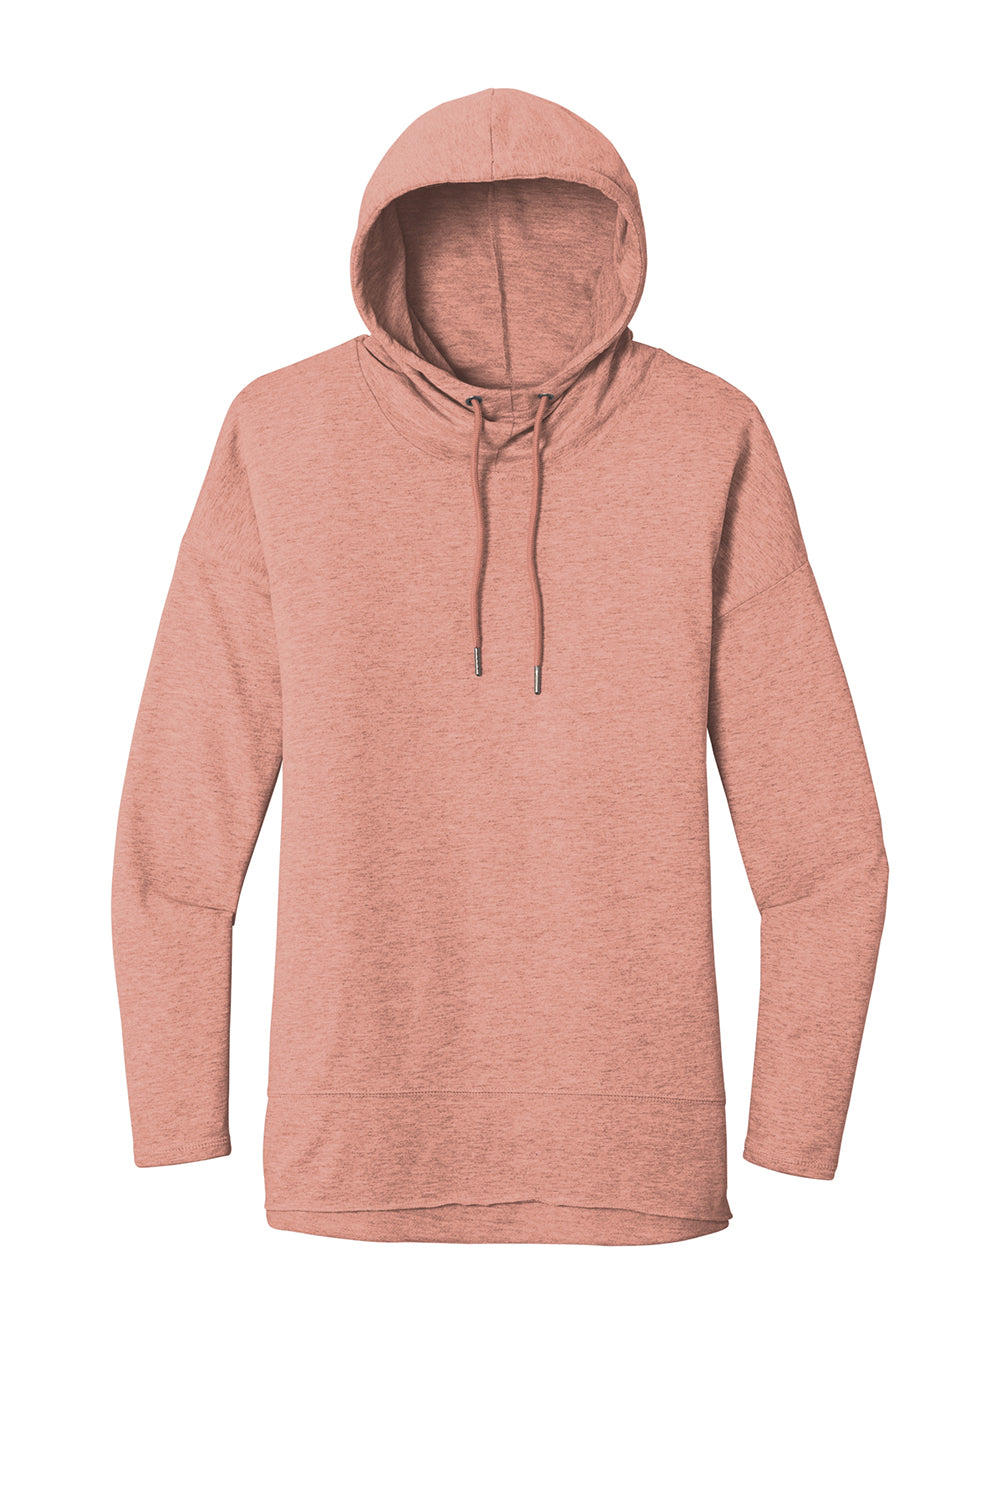 District DT671 Womens French Terry Hooded T-Shirt Hoodie Heather Nostalgia Rose Flat Front